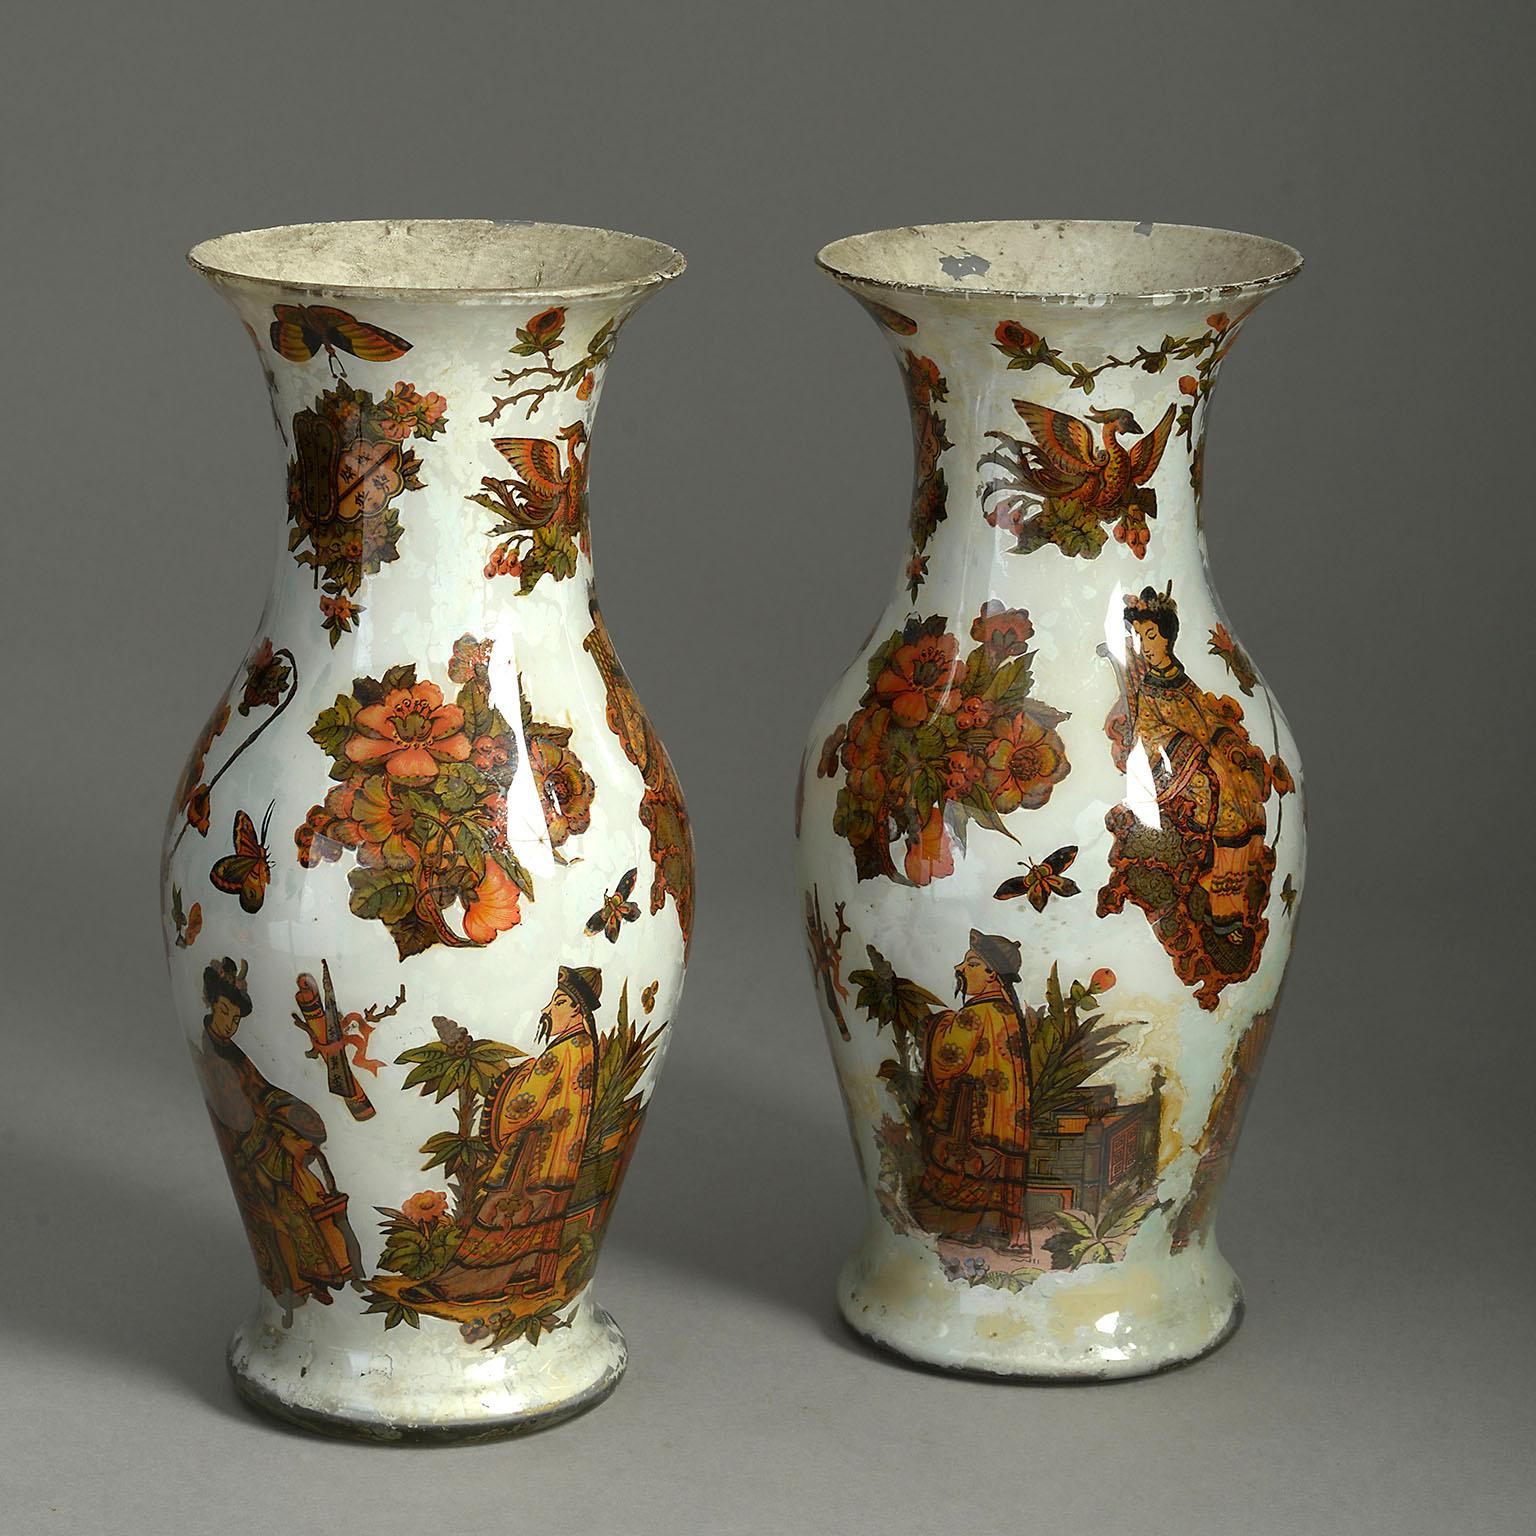 A pair of mid-19th century Decalcomania glass vases of baluster form, internally decorated with hand-painted polychrome chinoiseries upon a stone white ground.